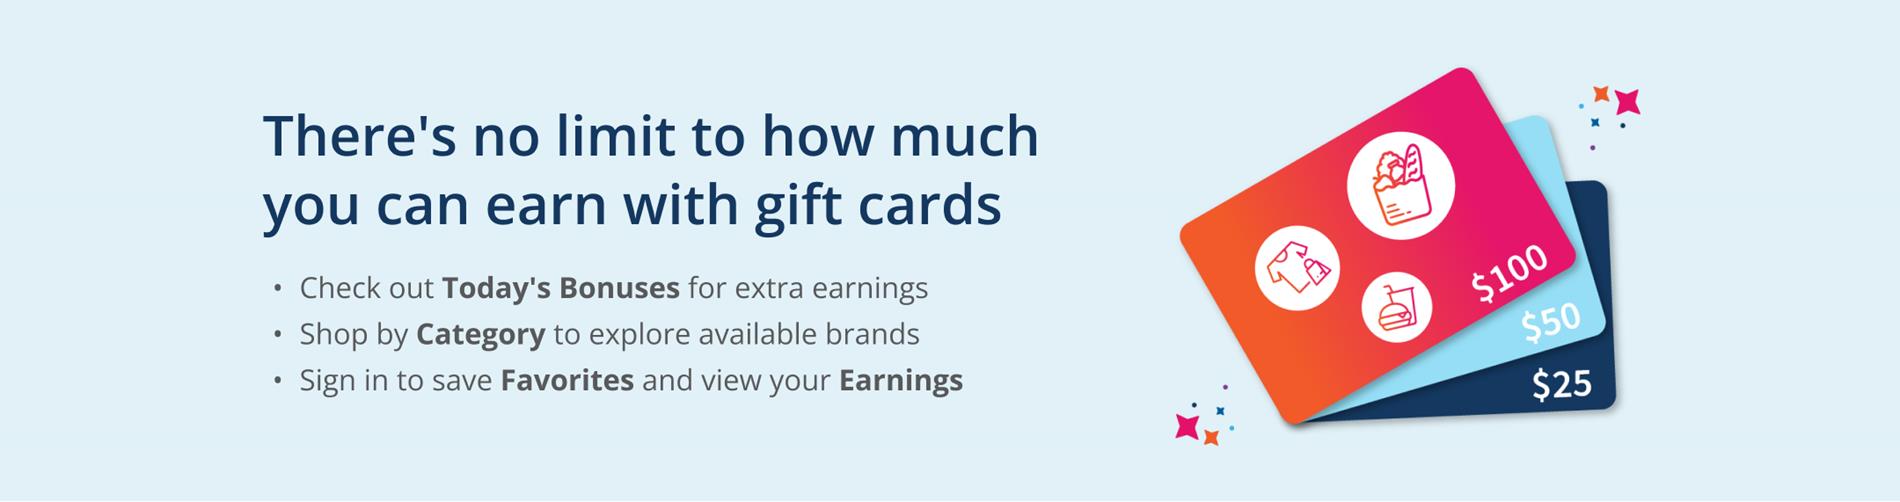 picture of gift cards and There is no limit to how much you can earn with gift cards.